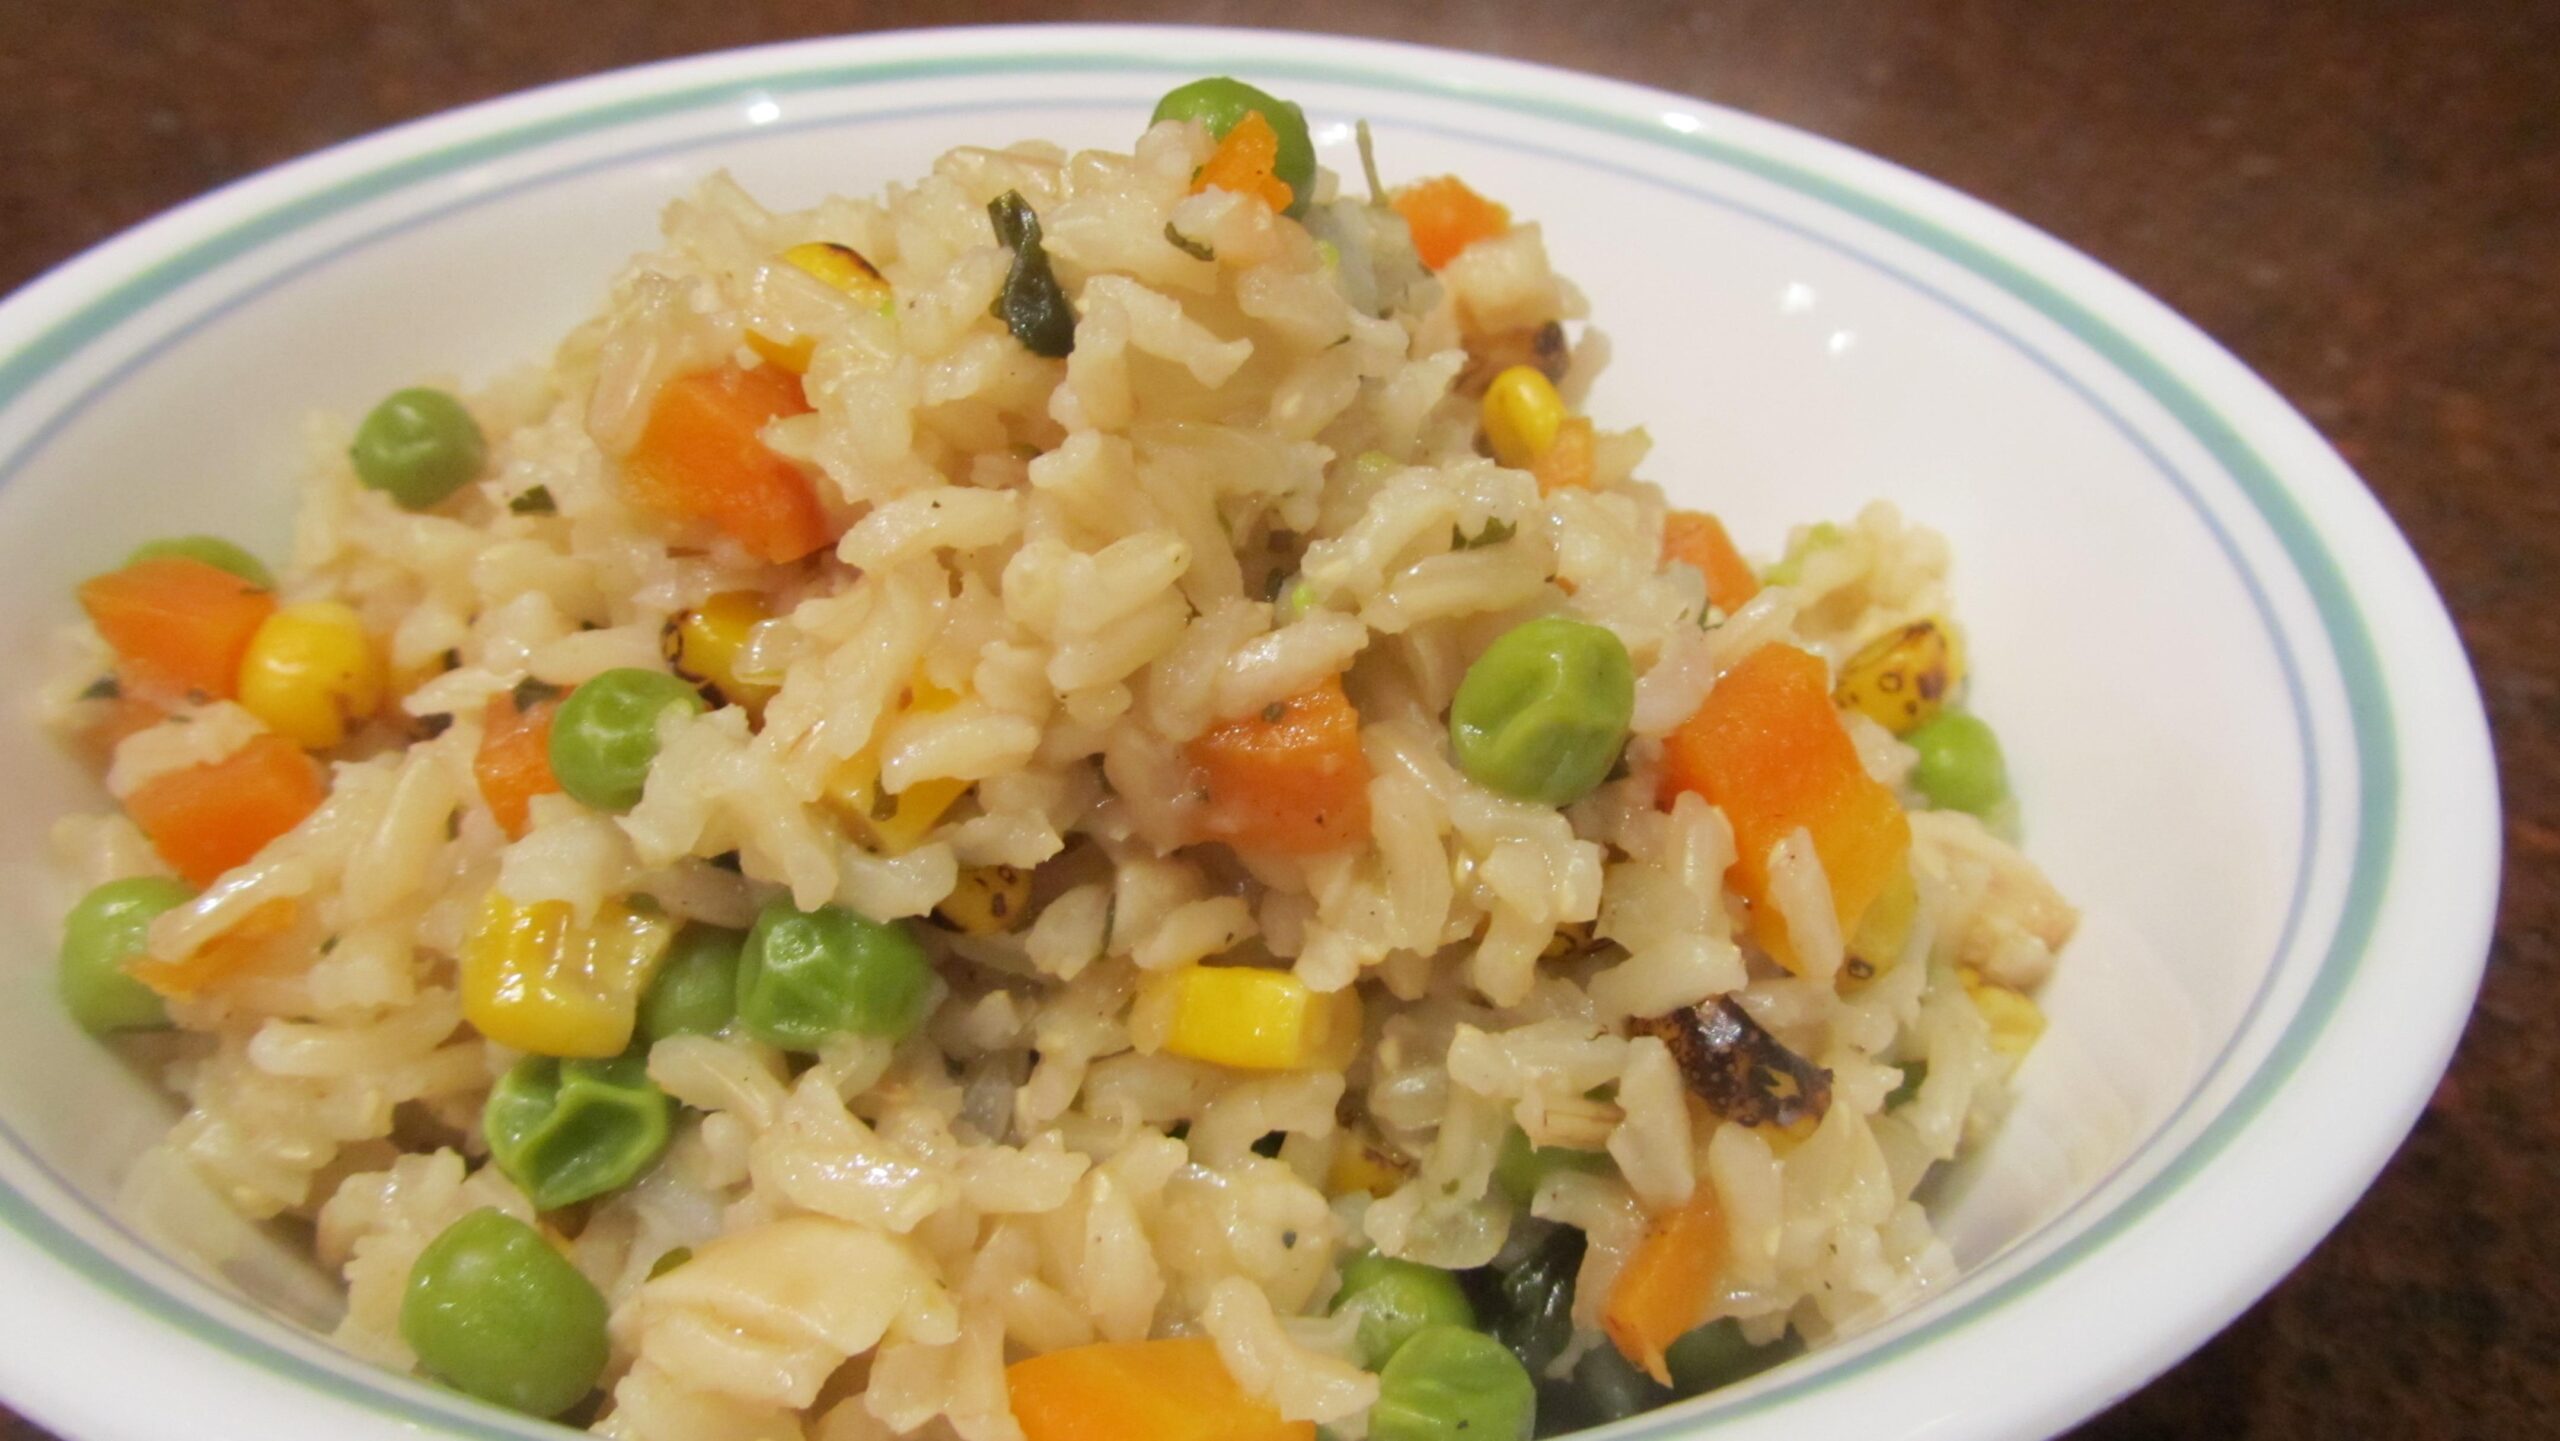  Perfectly cooked grains of brown rice combine with tender bits of carrot and savory diced onion in this comforting pilaf.